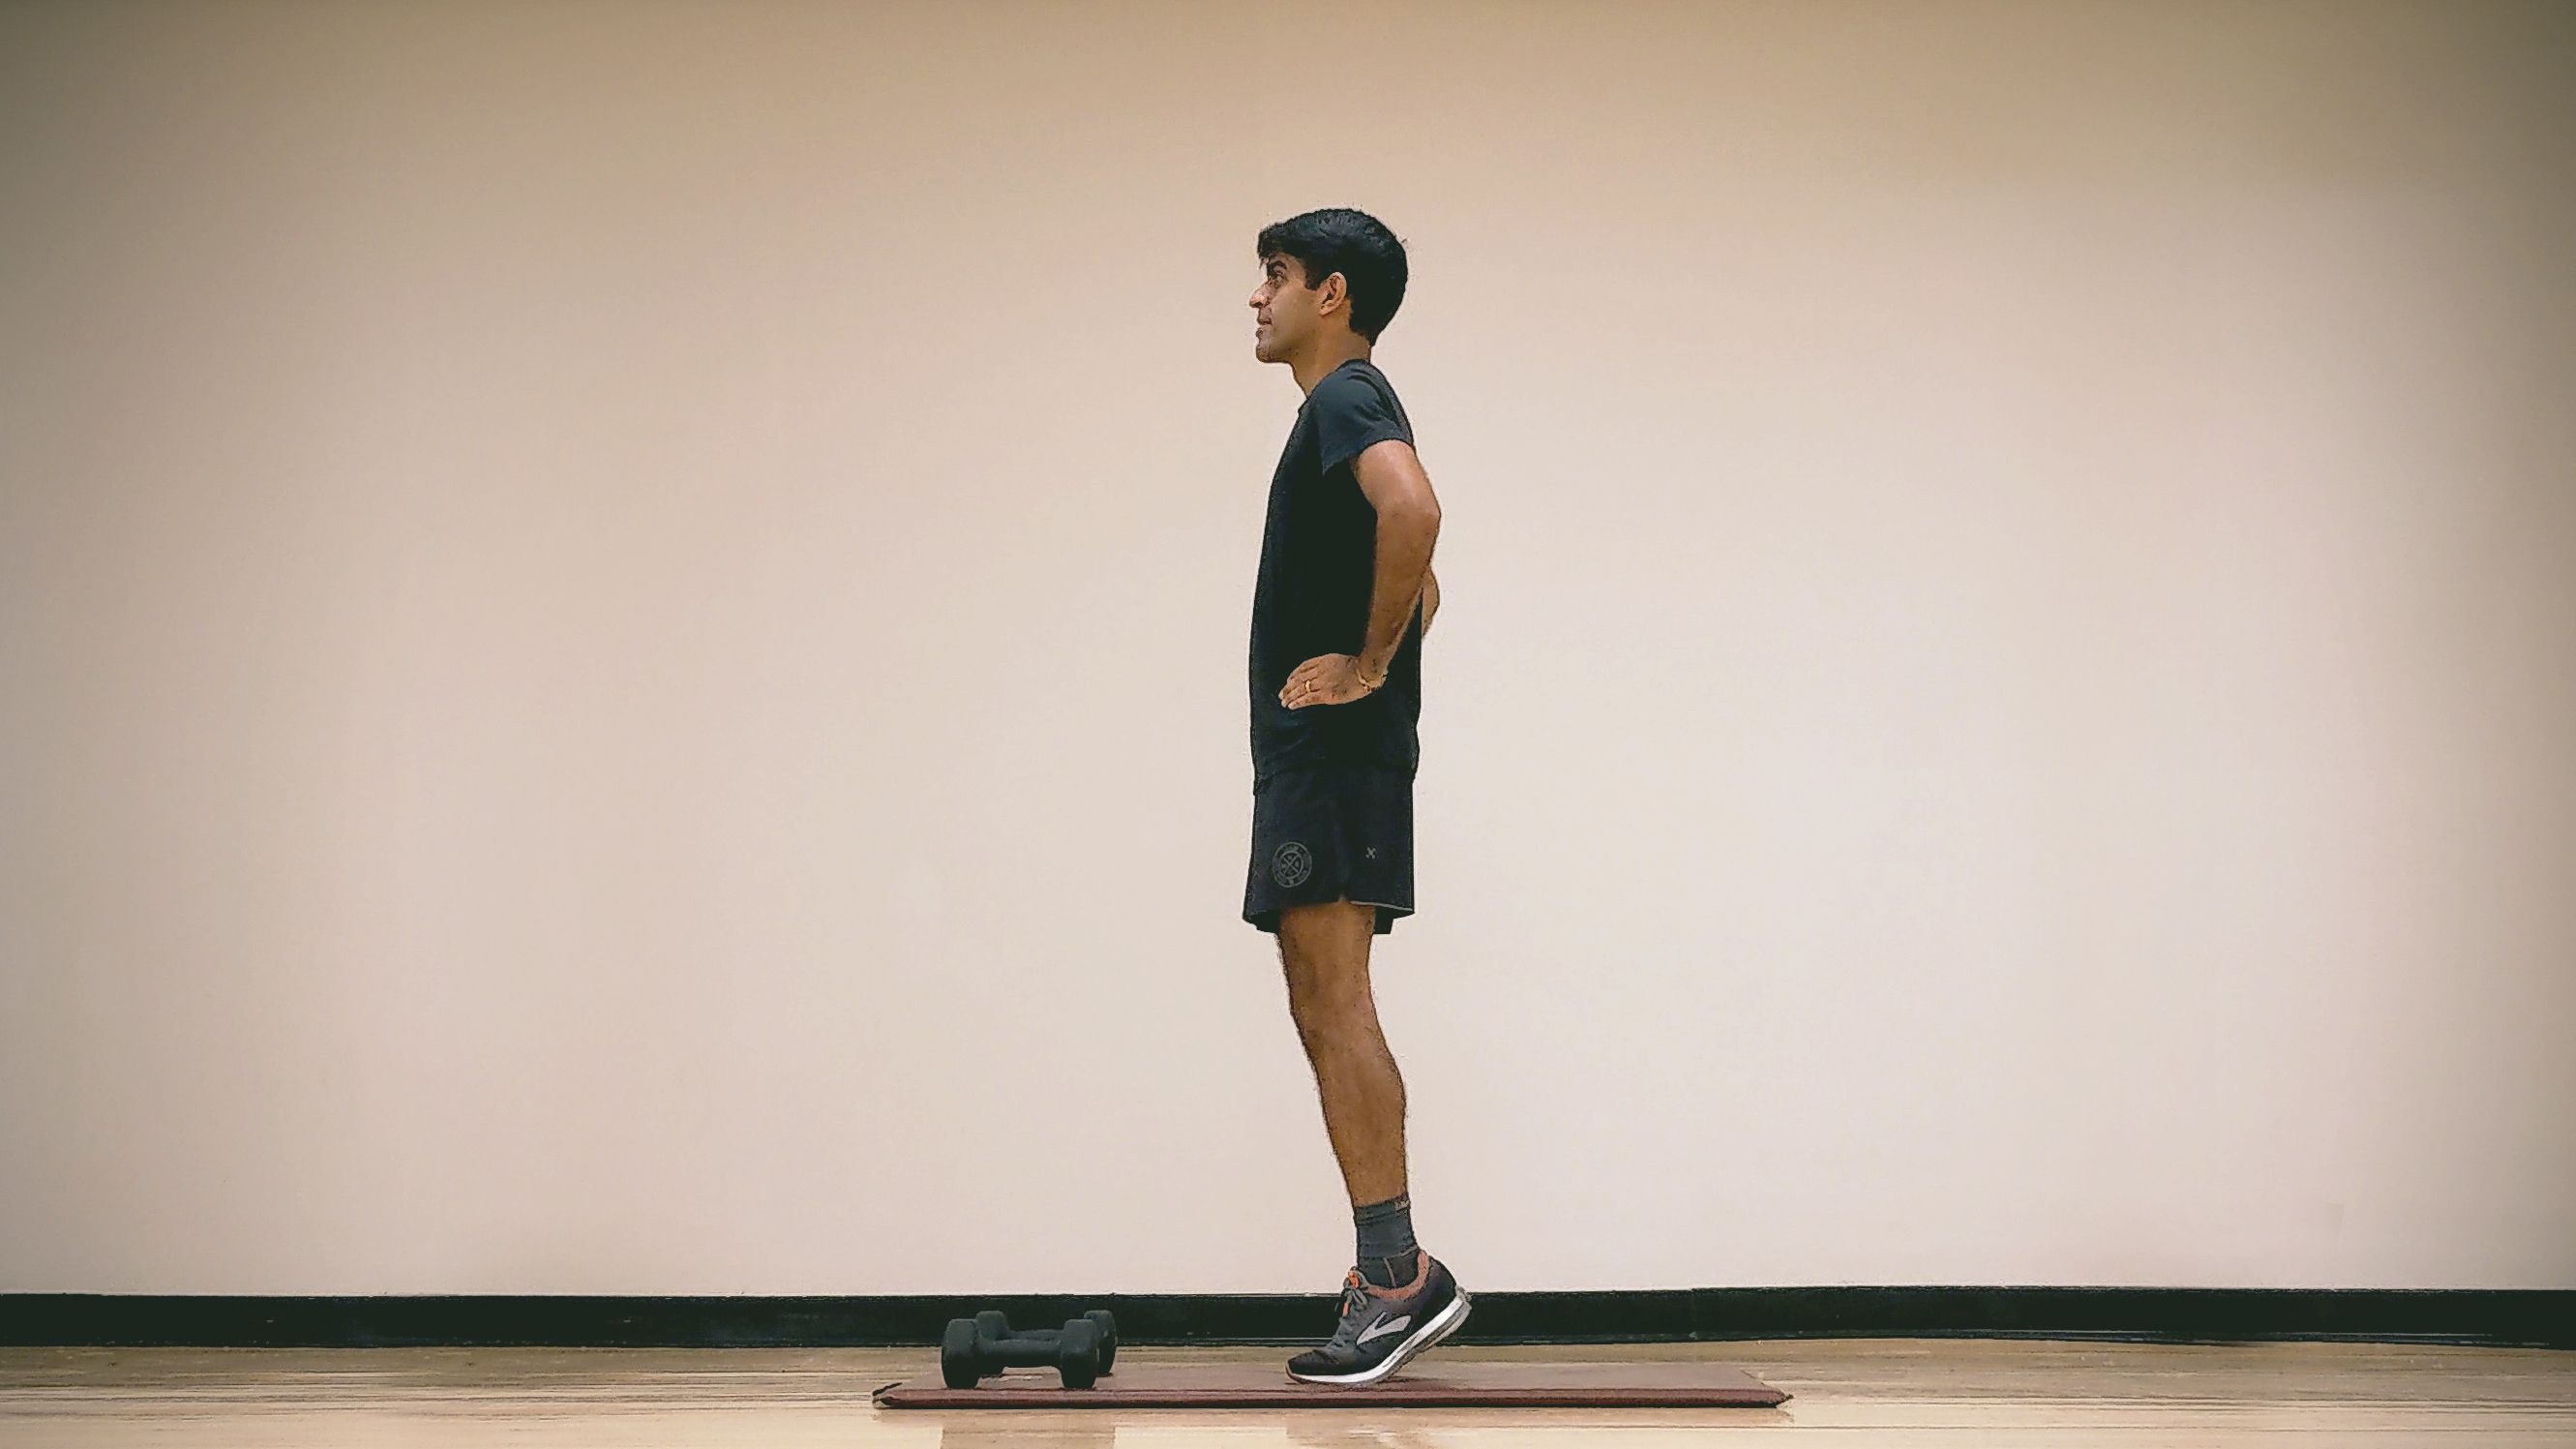 Calf Raises Exercises For Mobility And Strength- Great For Seniors